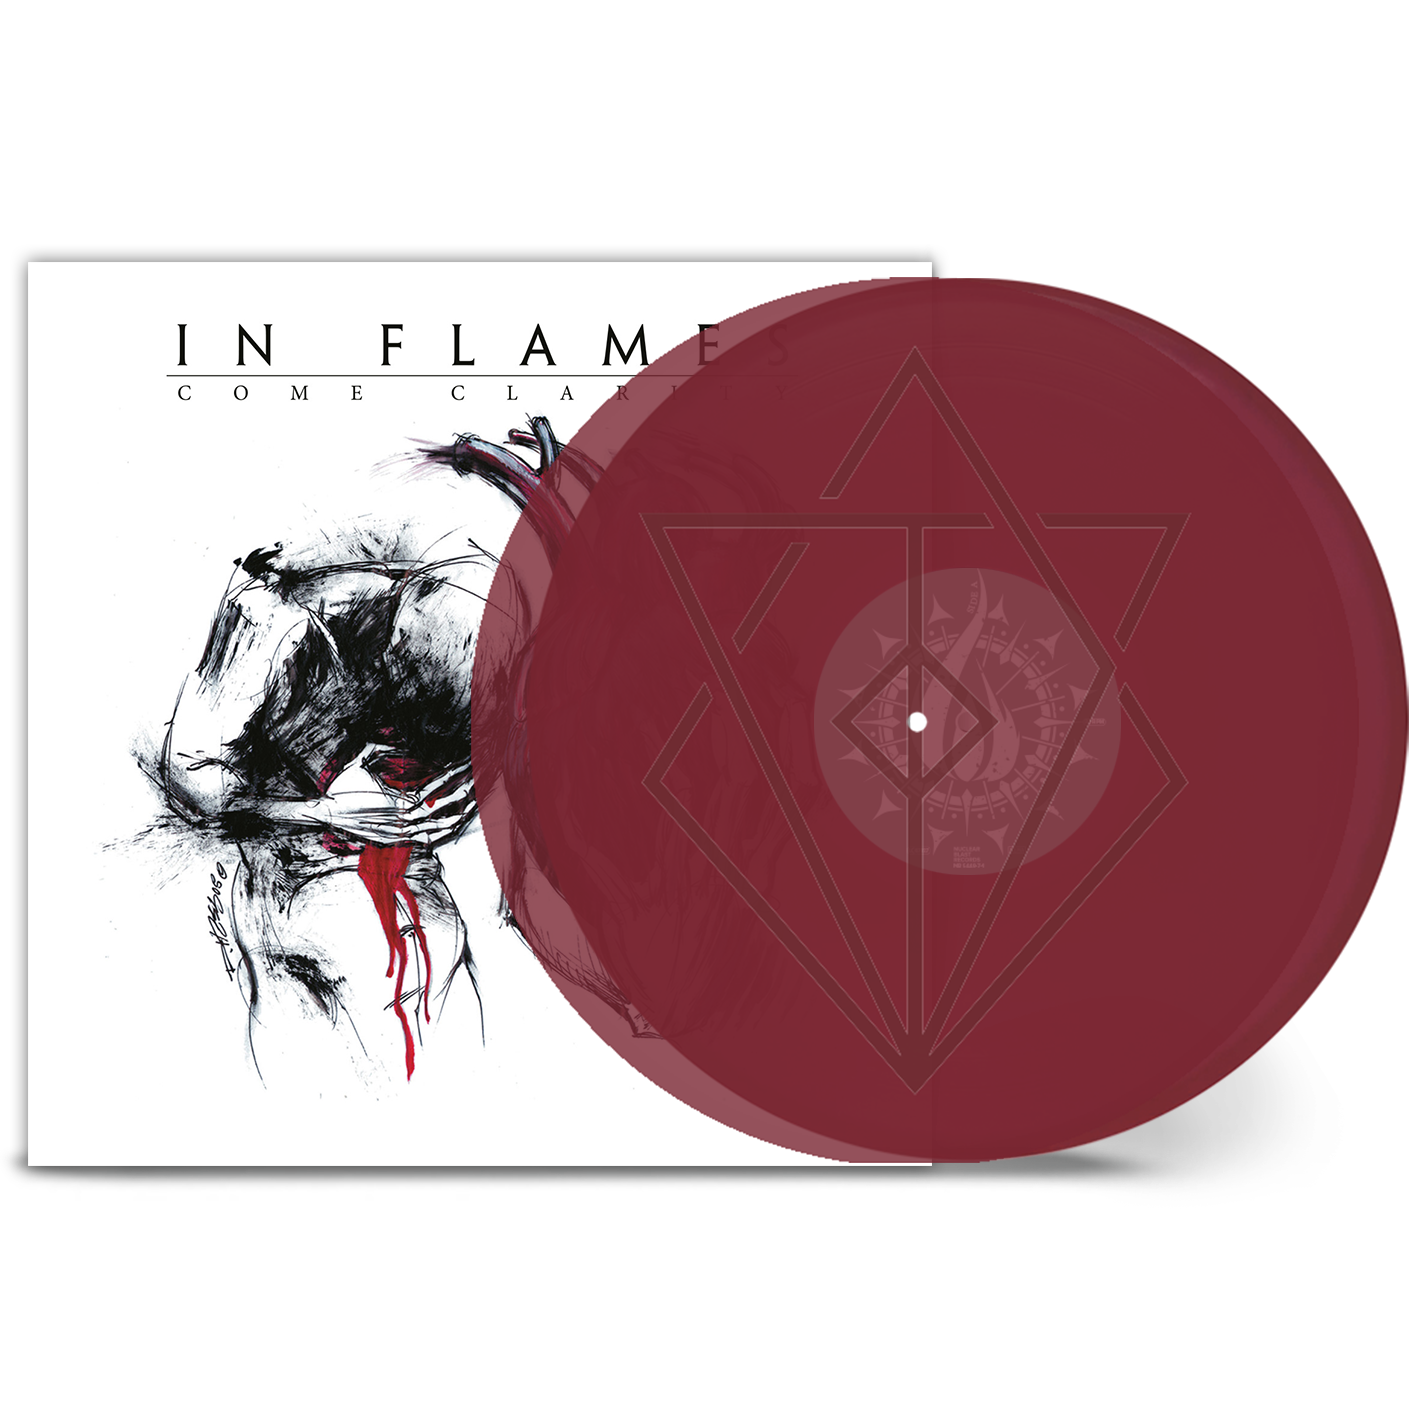 In Flames Shop - Come Clarity - In Flames - 2LP 180g - Transparent Violet  (Side D - Etched)